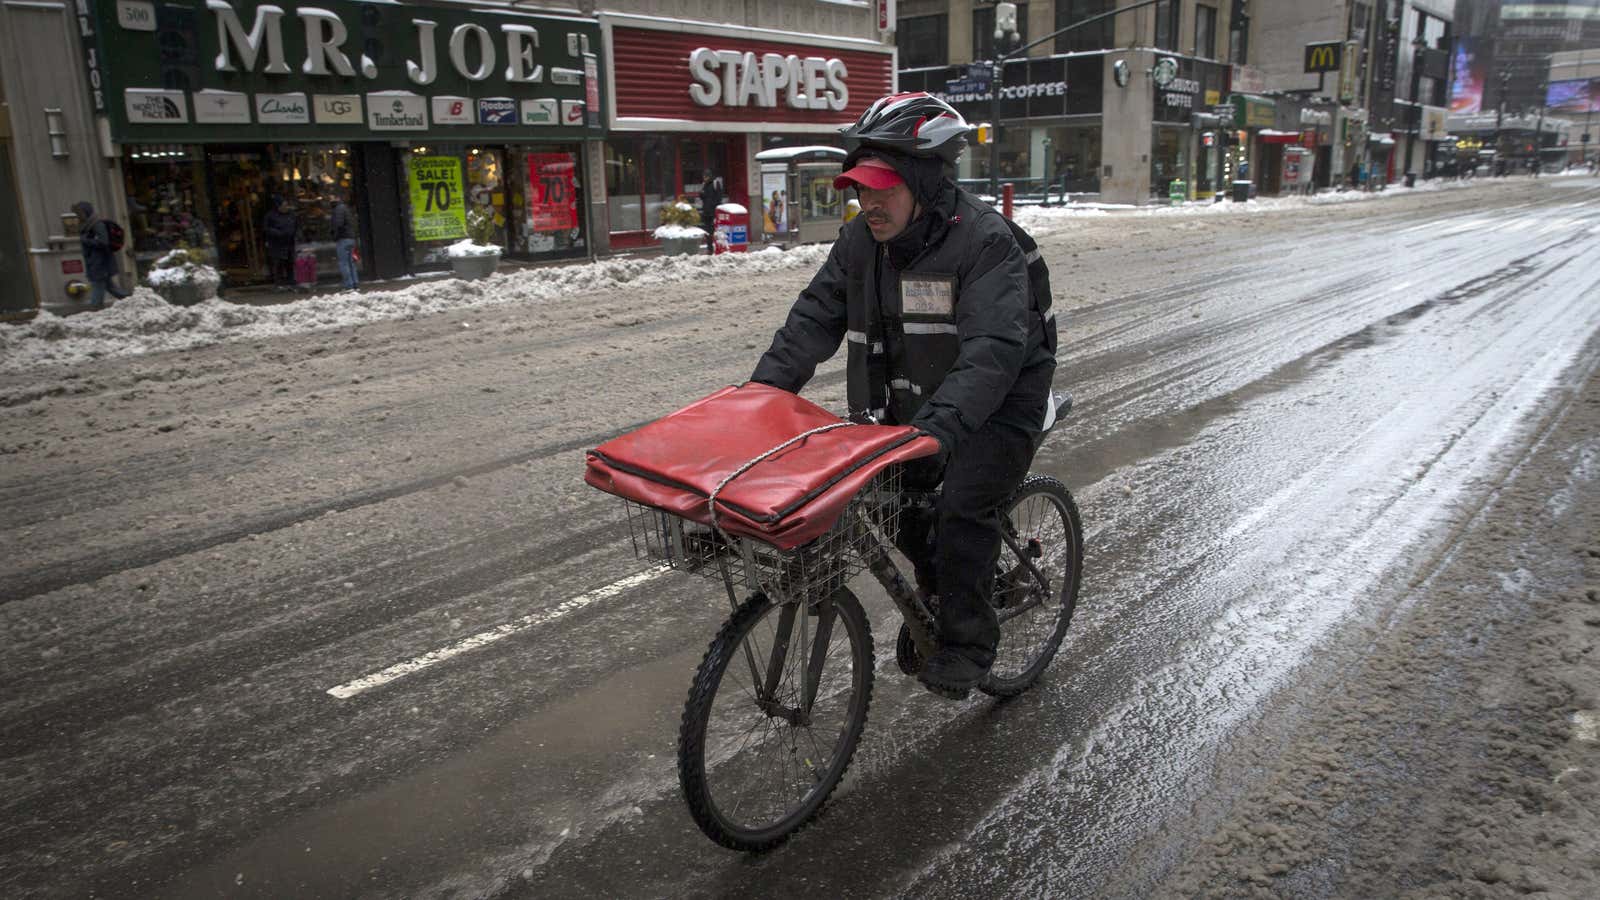 Probably delivering from Seamless.